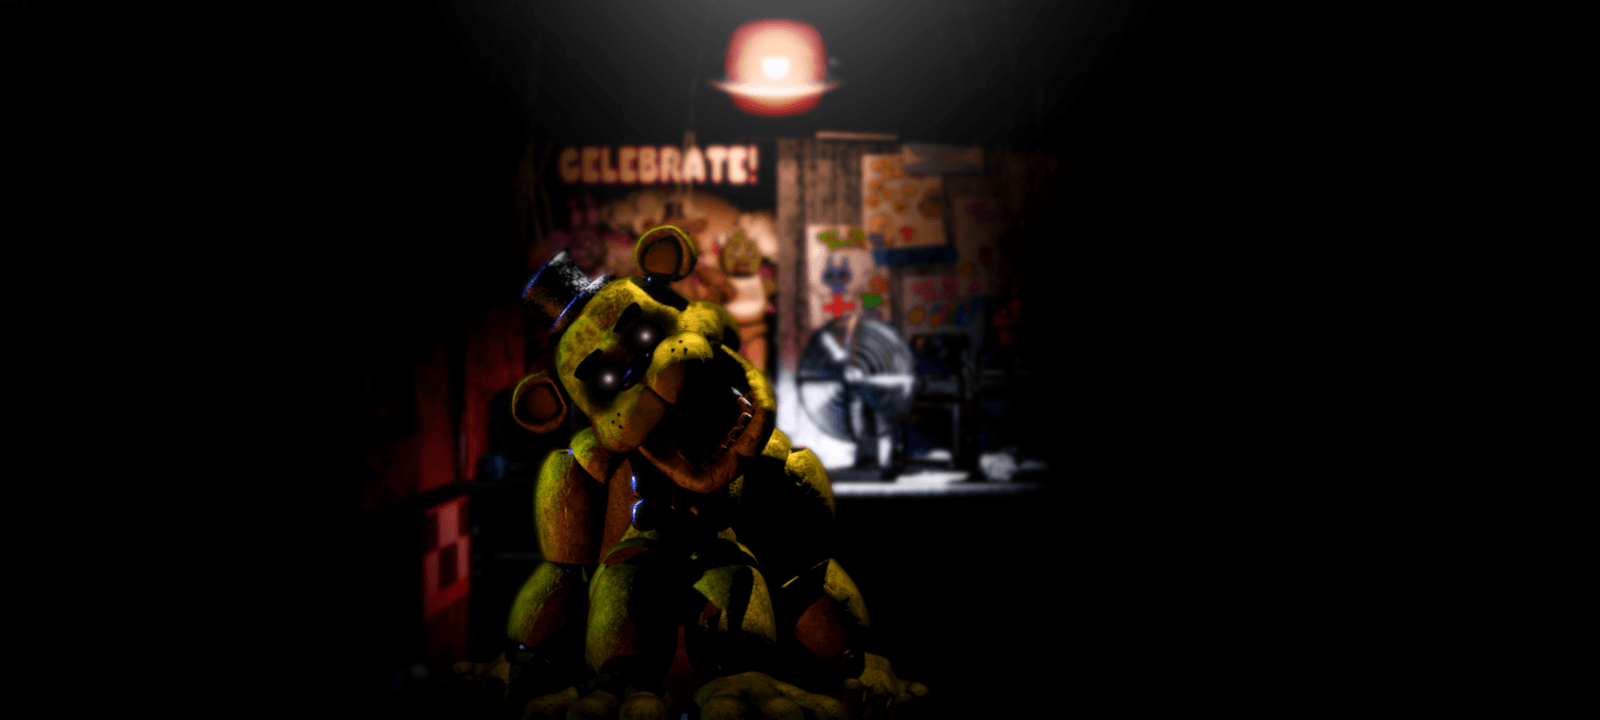 Five Nights At Freddy&Wallpapers